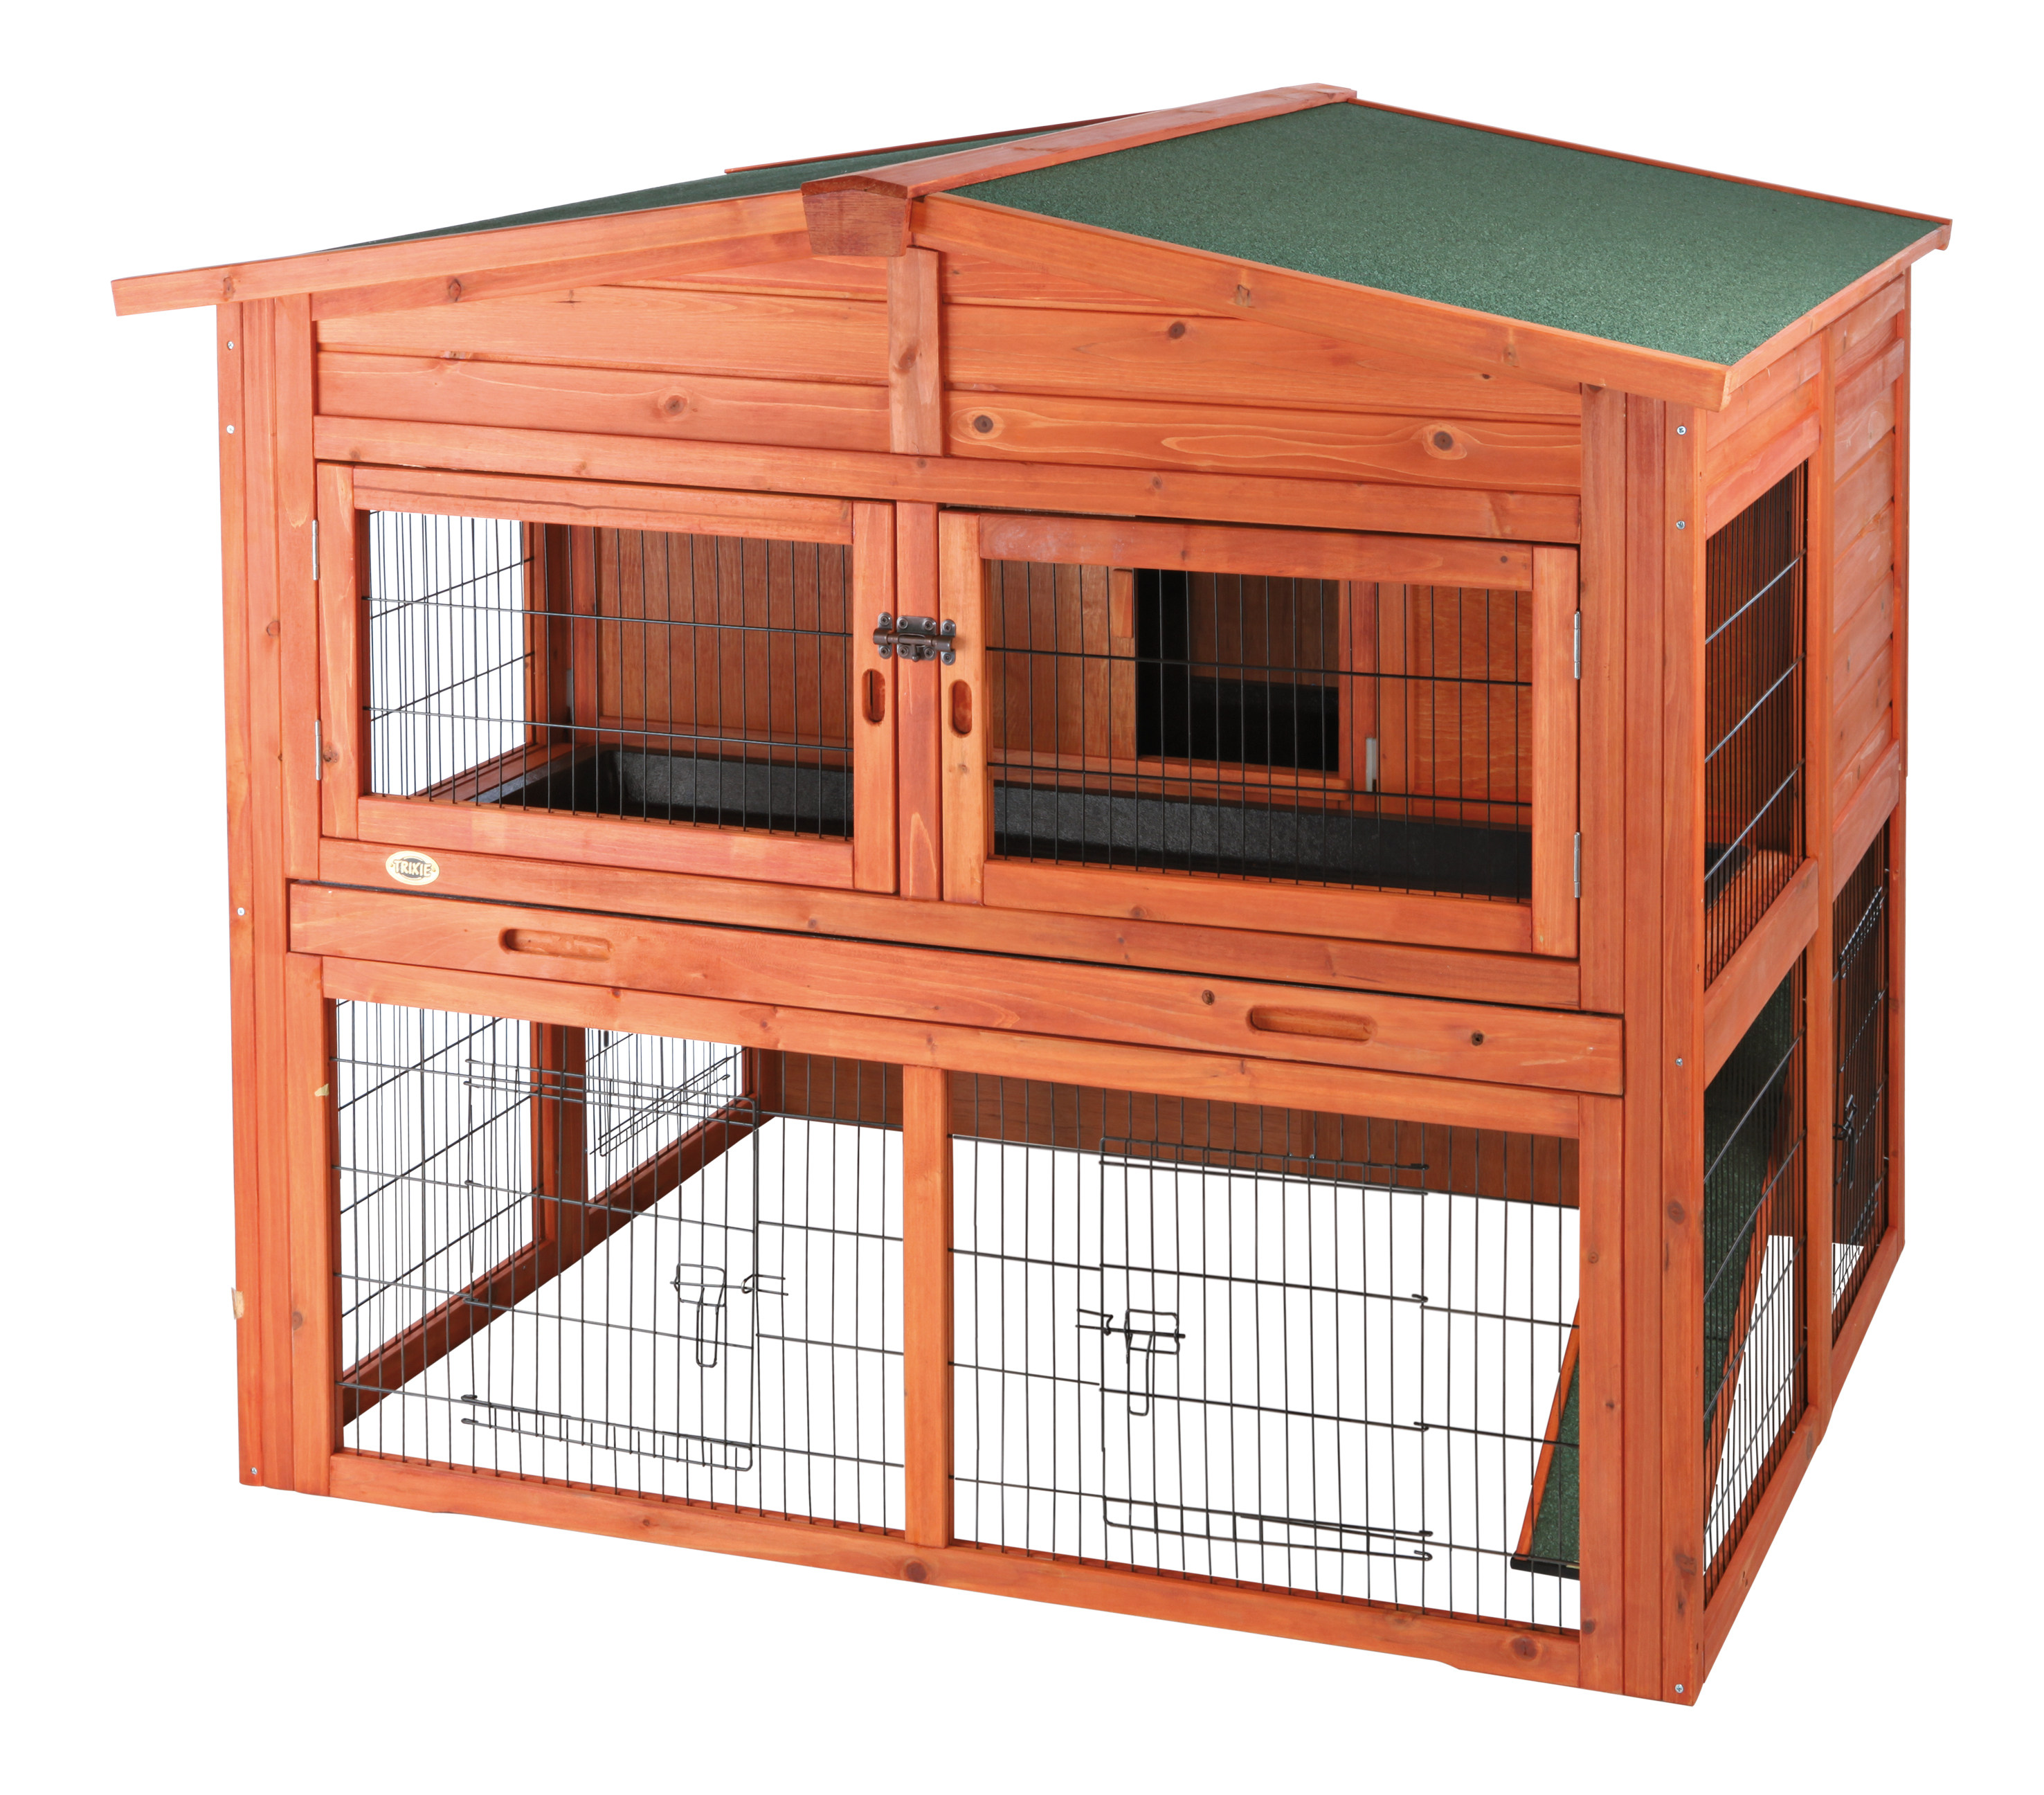 TRIXIE Deluxe Weatherproof Outdoor 2-Story Large Wooden Small Animal Hutch, Run, Tray, Brown - image 3 of 7